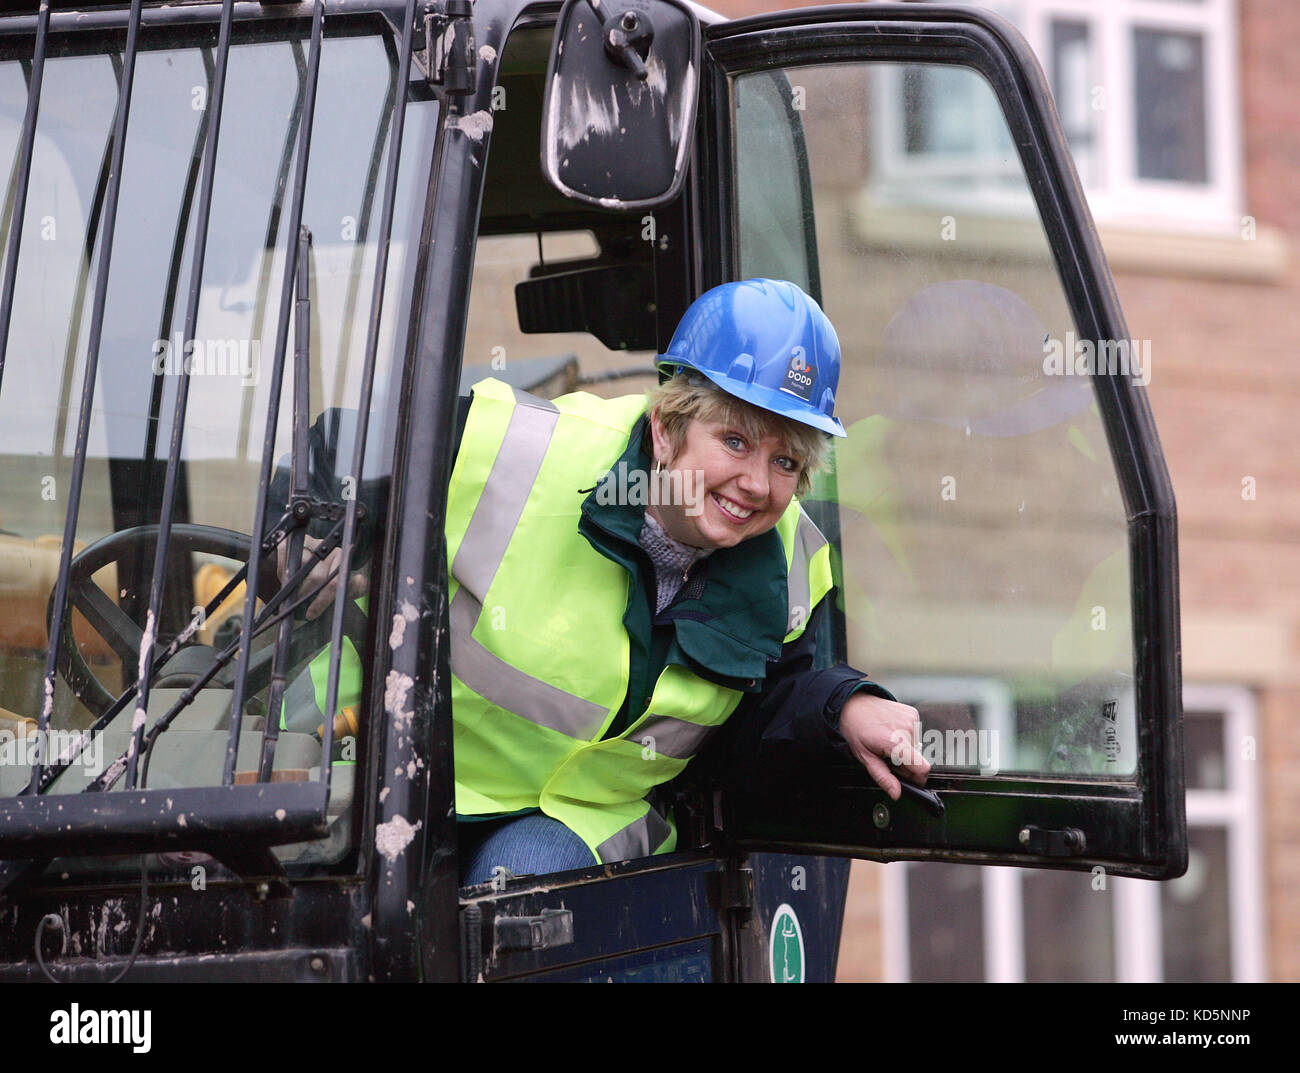 Karen Lumley, Conservative MP for Redditch tries out the life of a biuilder. Stock Photo